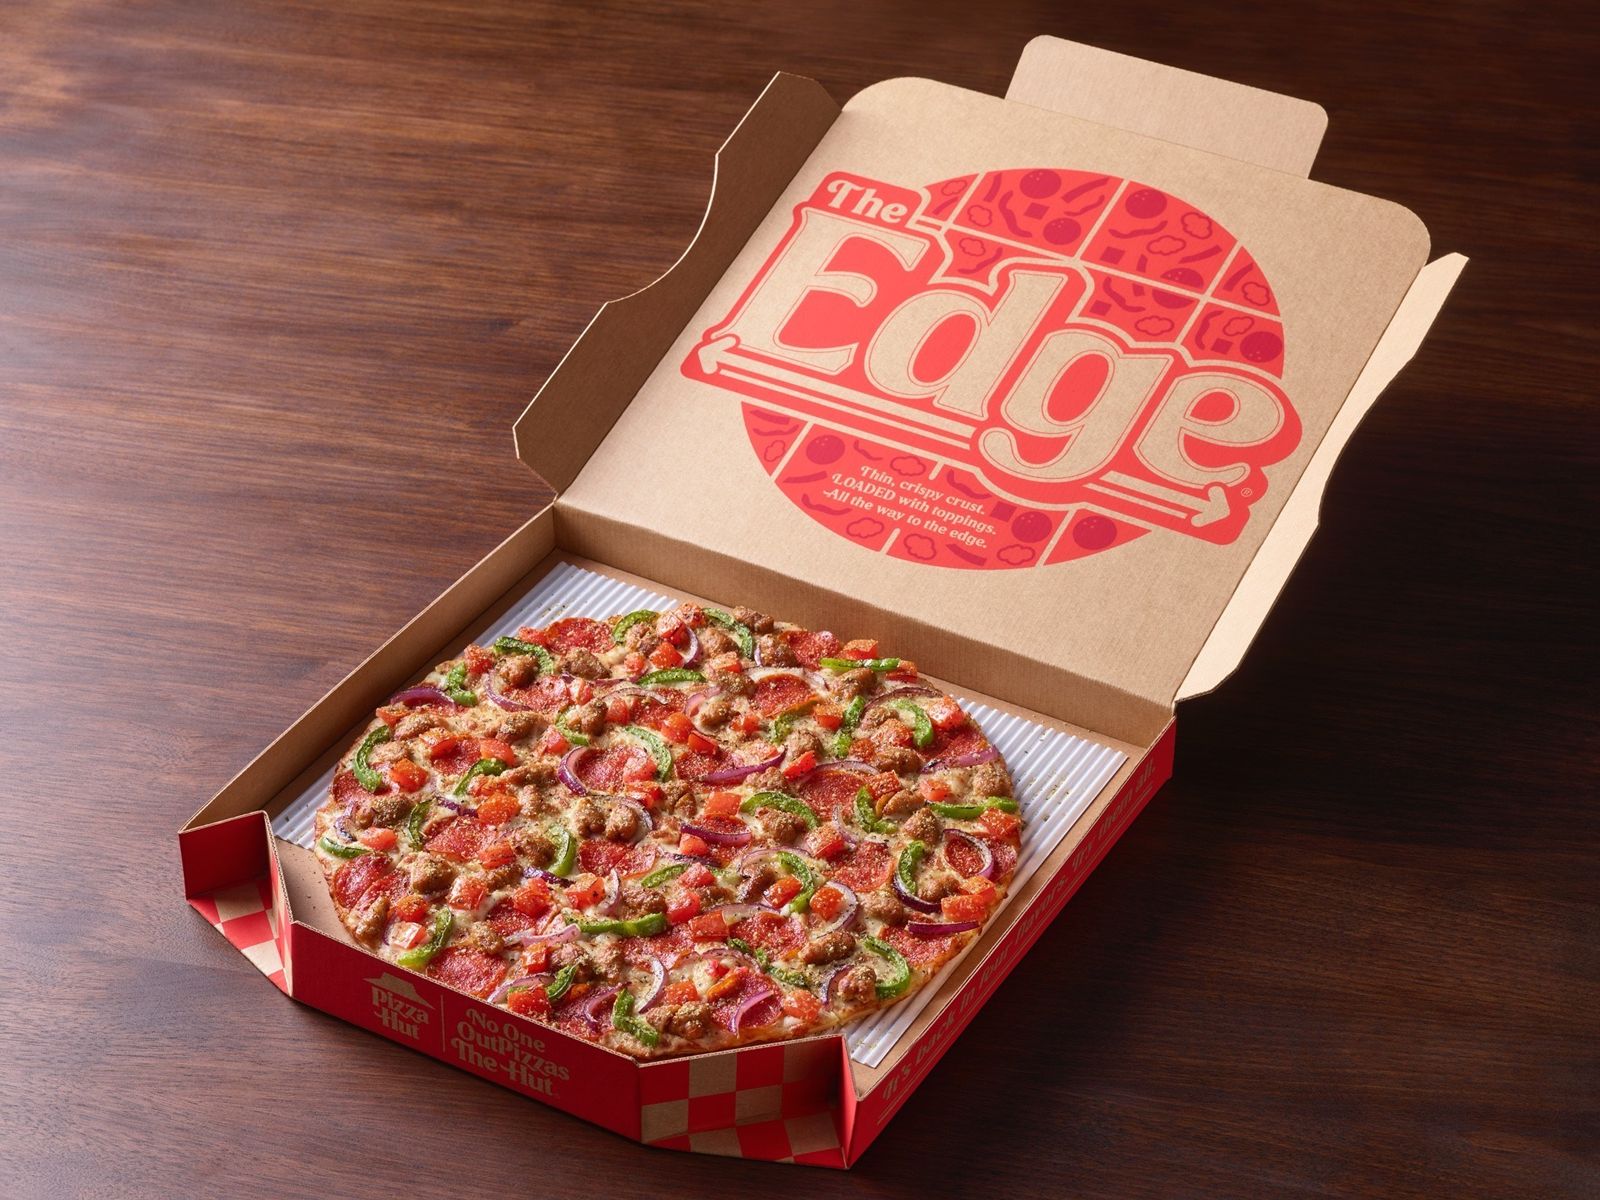 Topping Lovers Rejoice! Pizza Hut Takes You Alllll The Way To The Edge With Nationwide Return Of Iconic Thin Crust Pizza